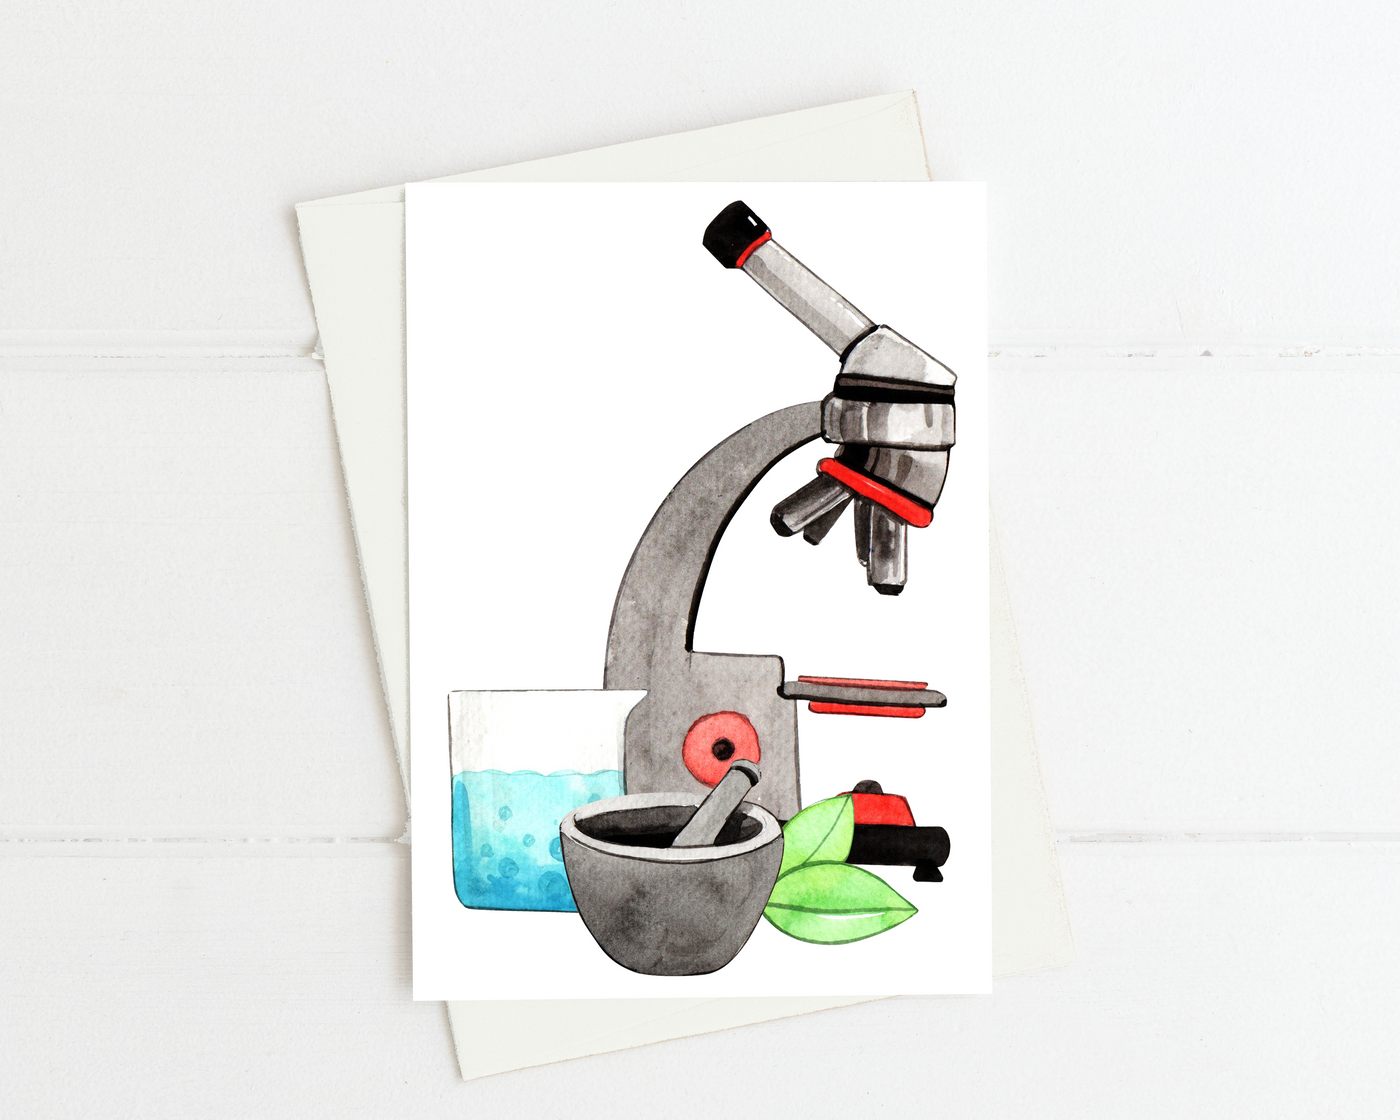 watercolor style image of a microscope with a mortar and pestle